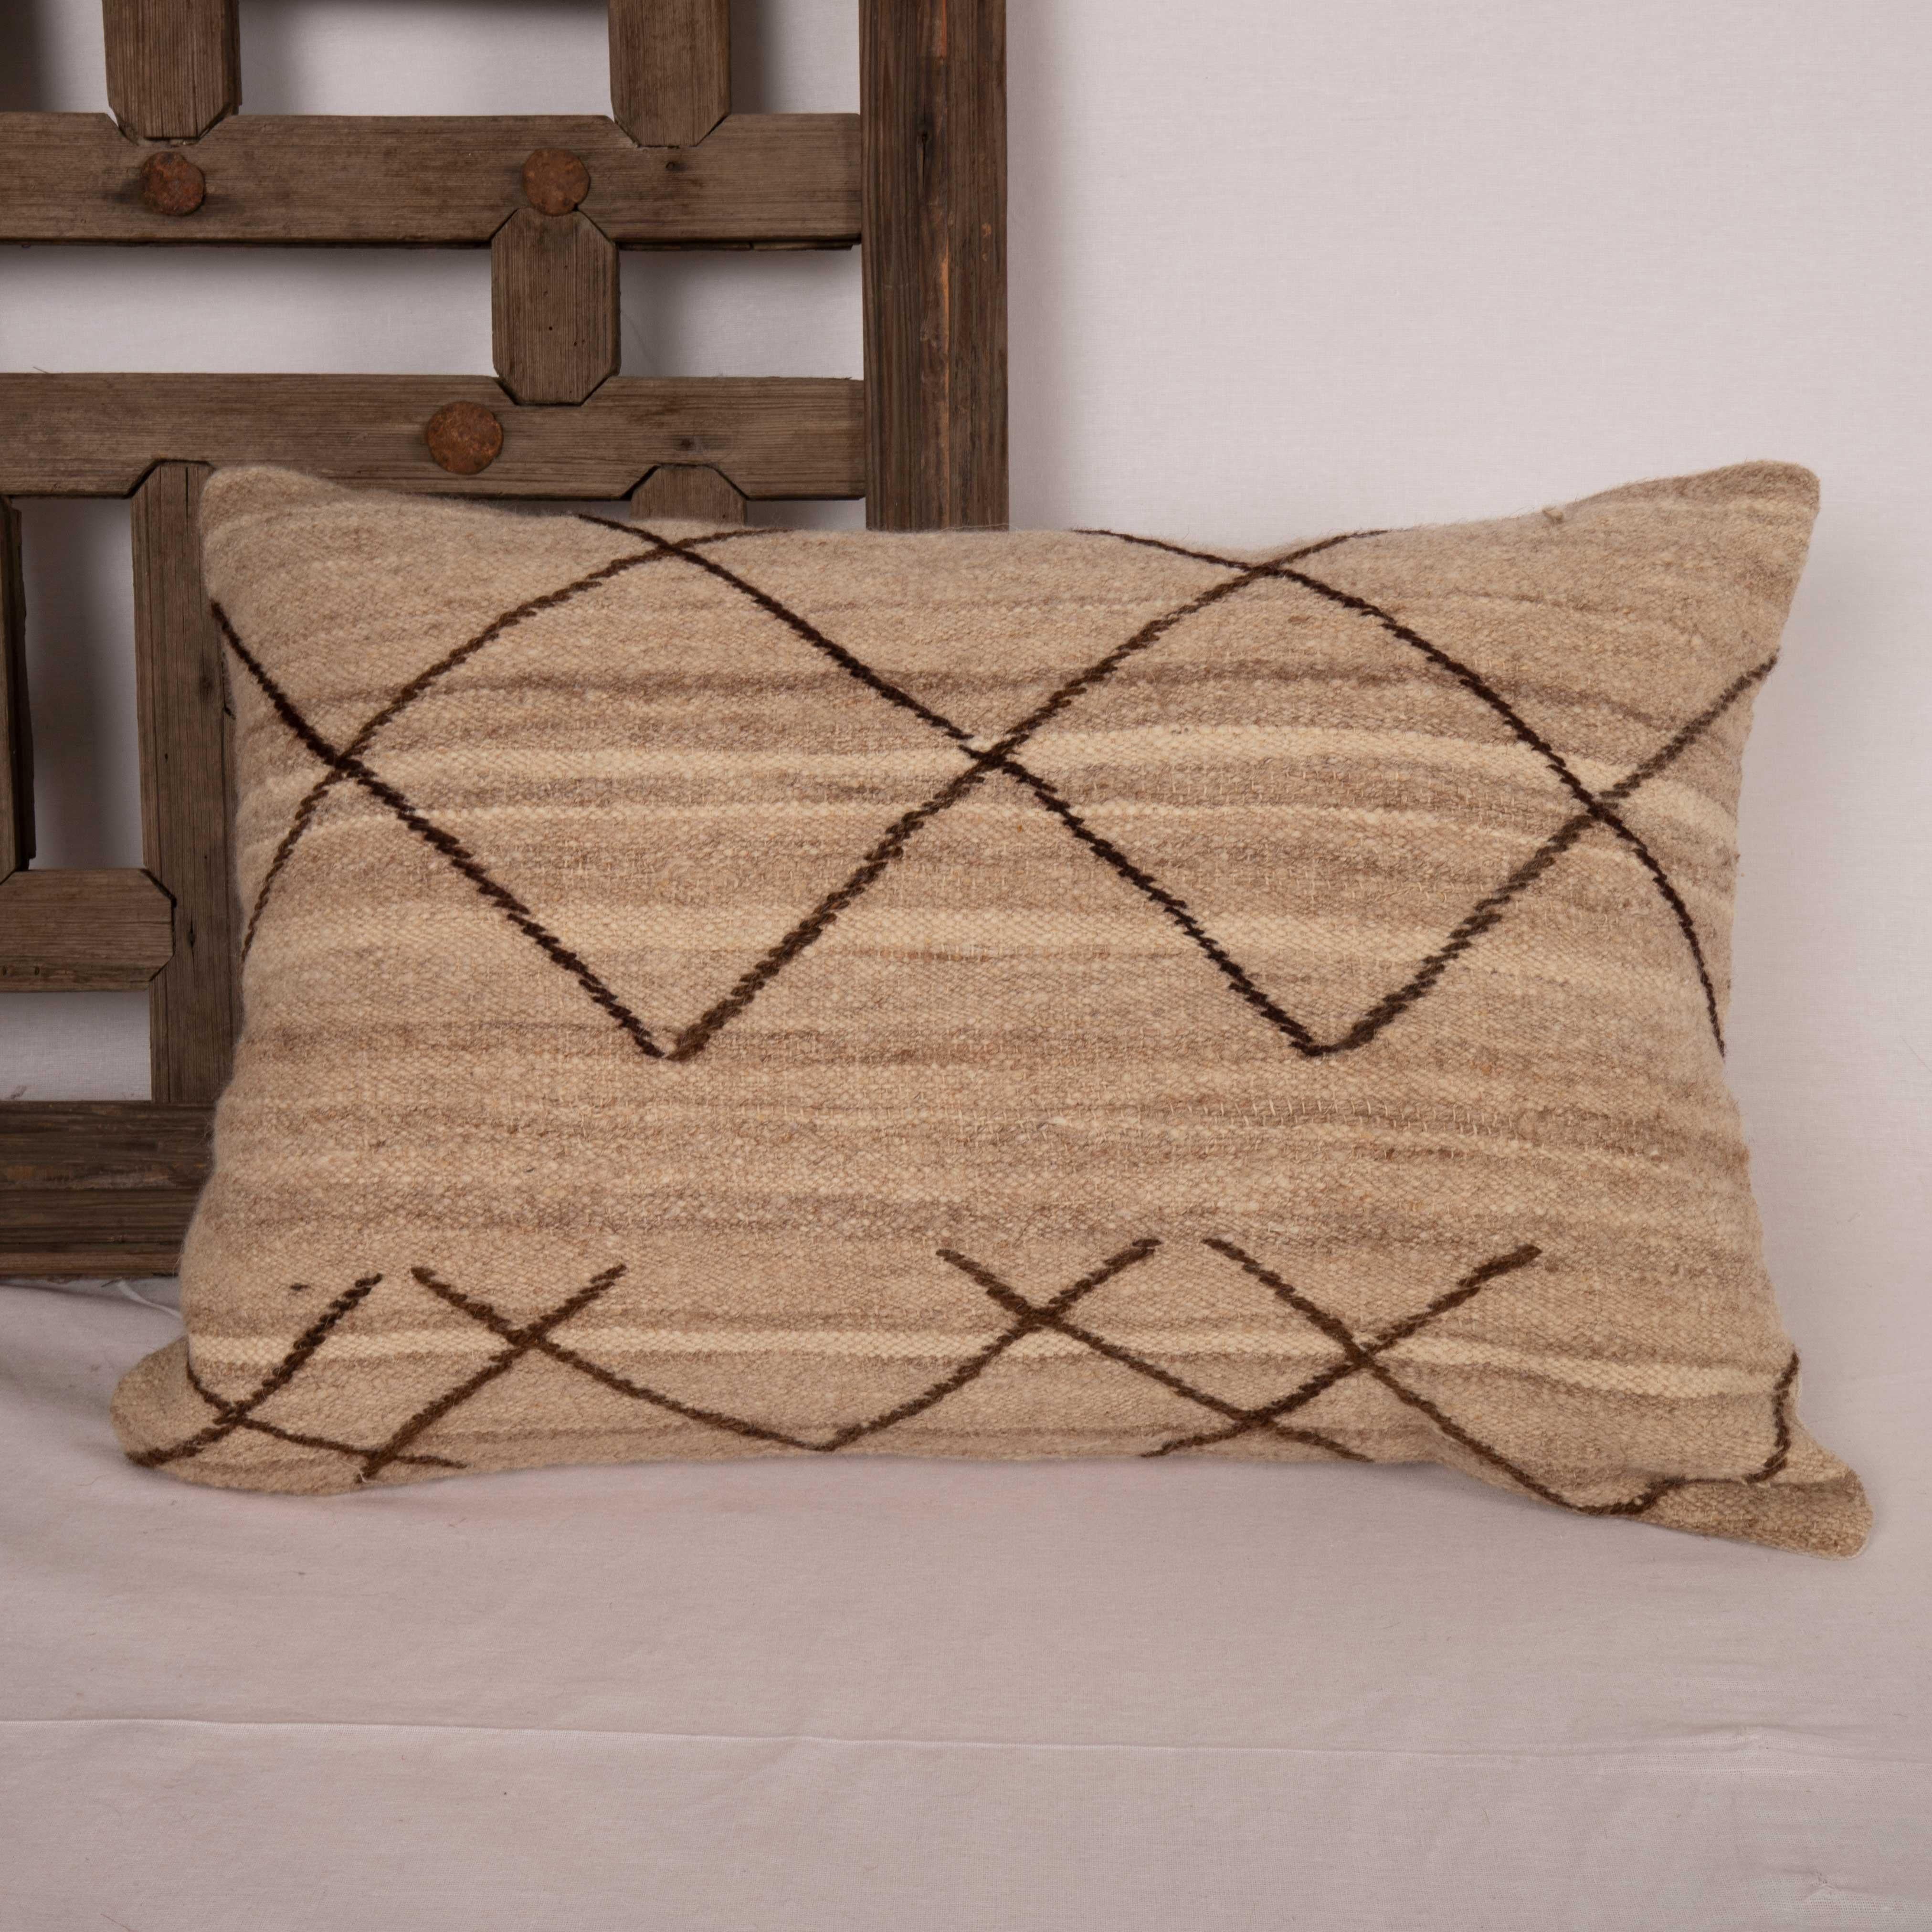 The materials this pillowcase is made from purely natural, undyed wool, dating back to mid 20th C.
Embroidered design elements on it are our design and they are purely hand done on the vintage materials.
It does not come with an insert.
Linen in